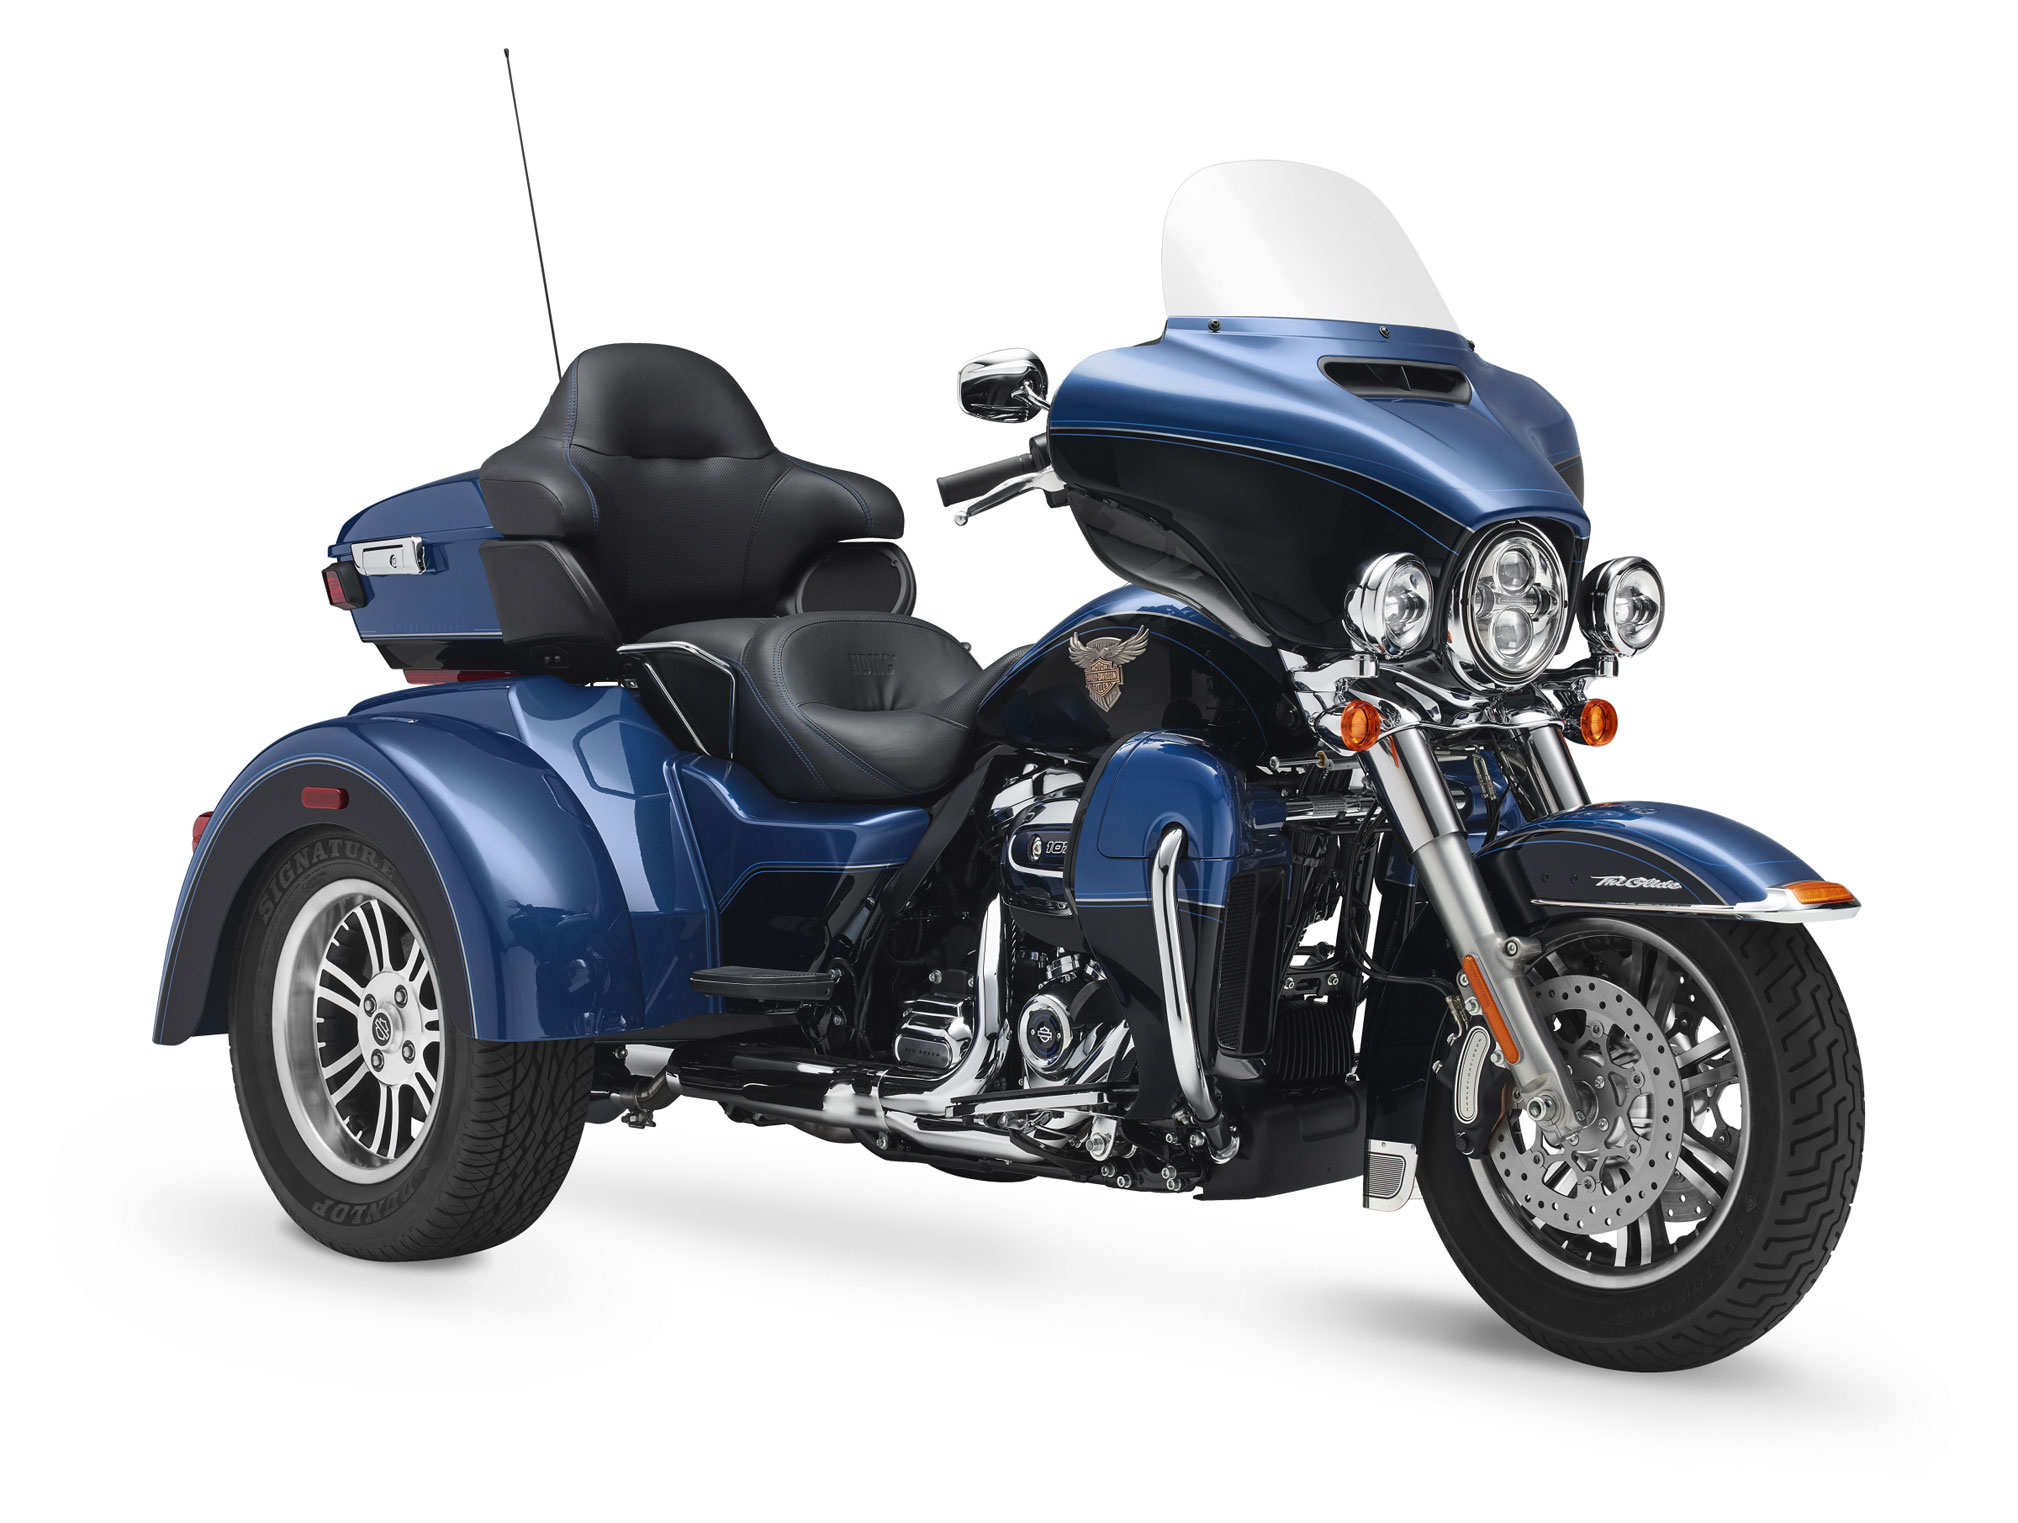 2018 Harley Davidson Tri Glide Ultra 115th Anniversary Review Total Motorcycle